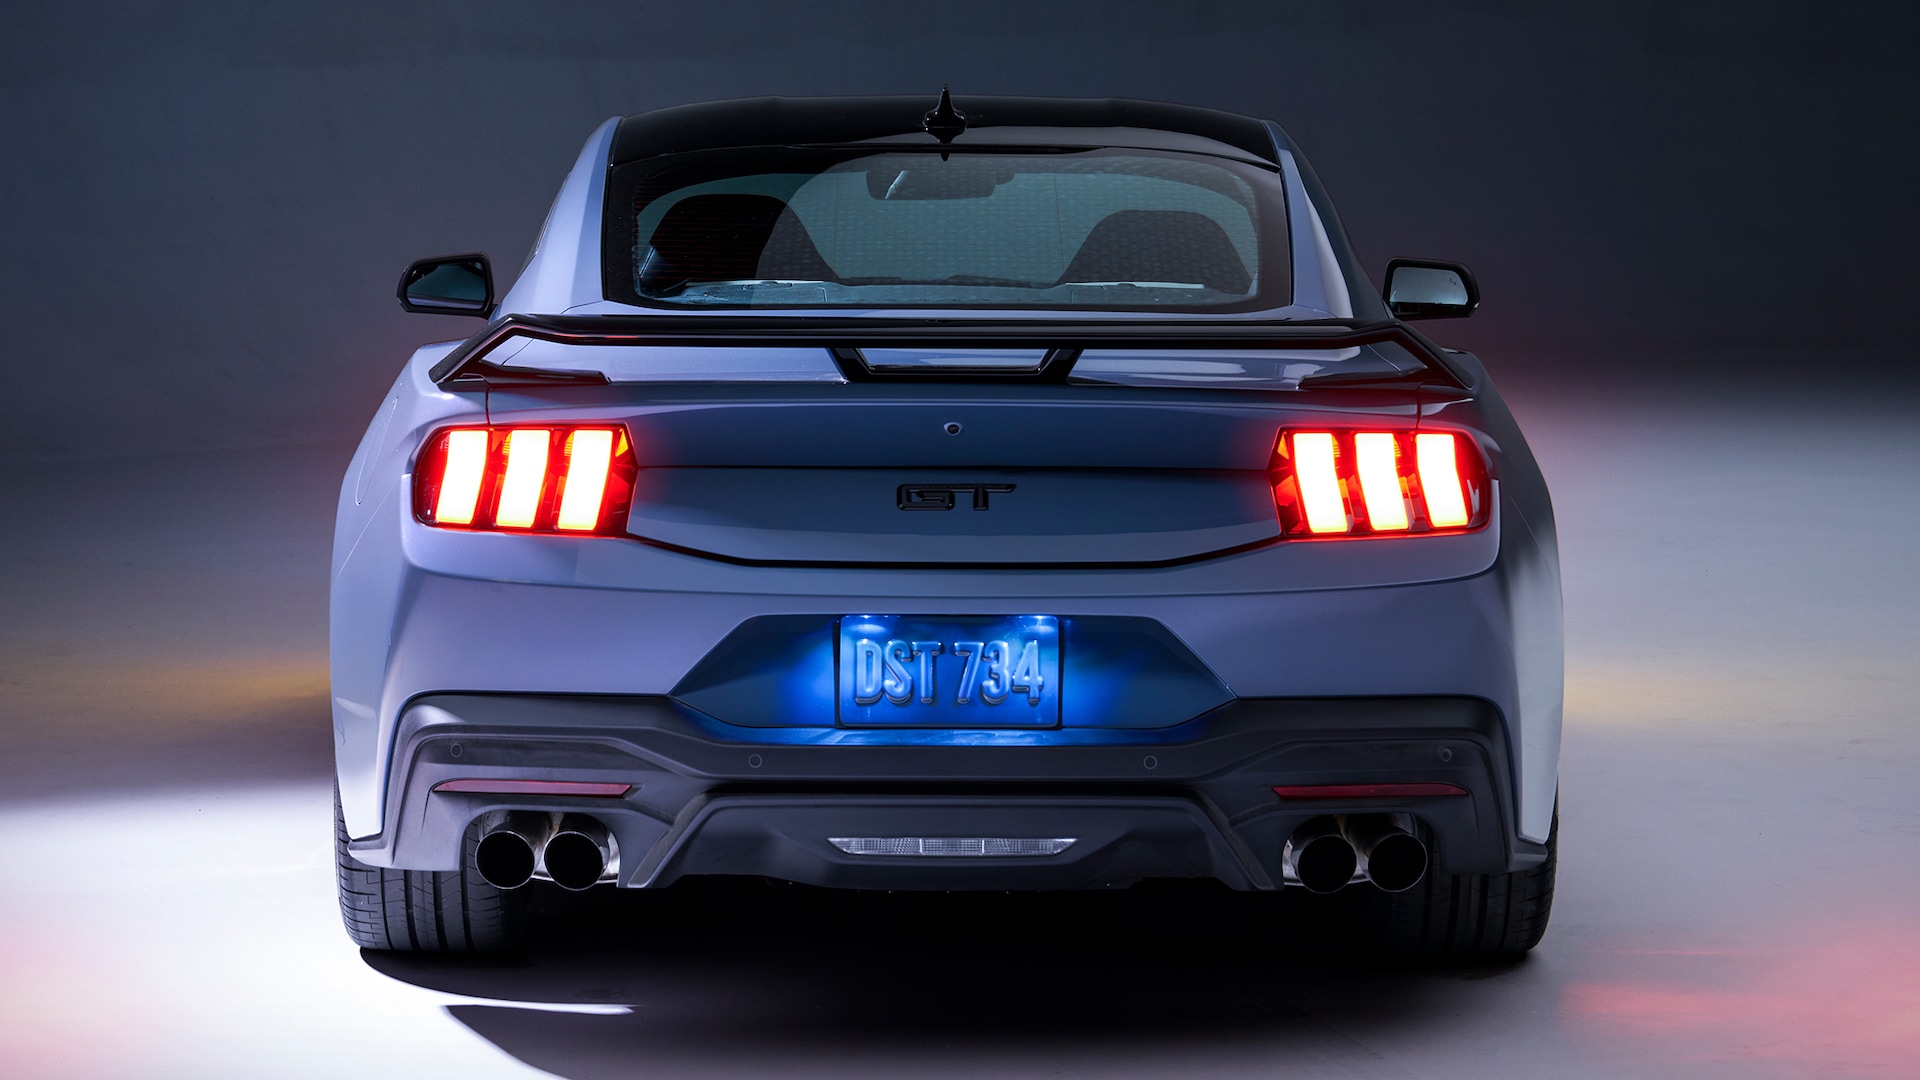 S650 Mustang What's your favourite S650 photo so far? 2024-ford-mustang-gt-16